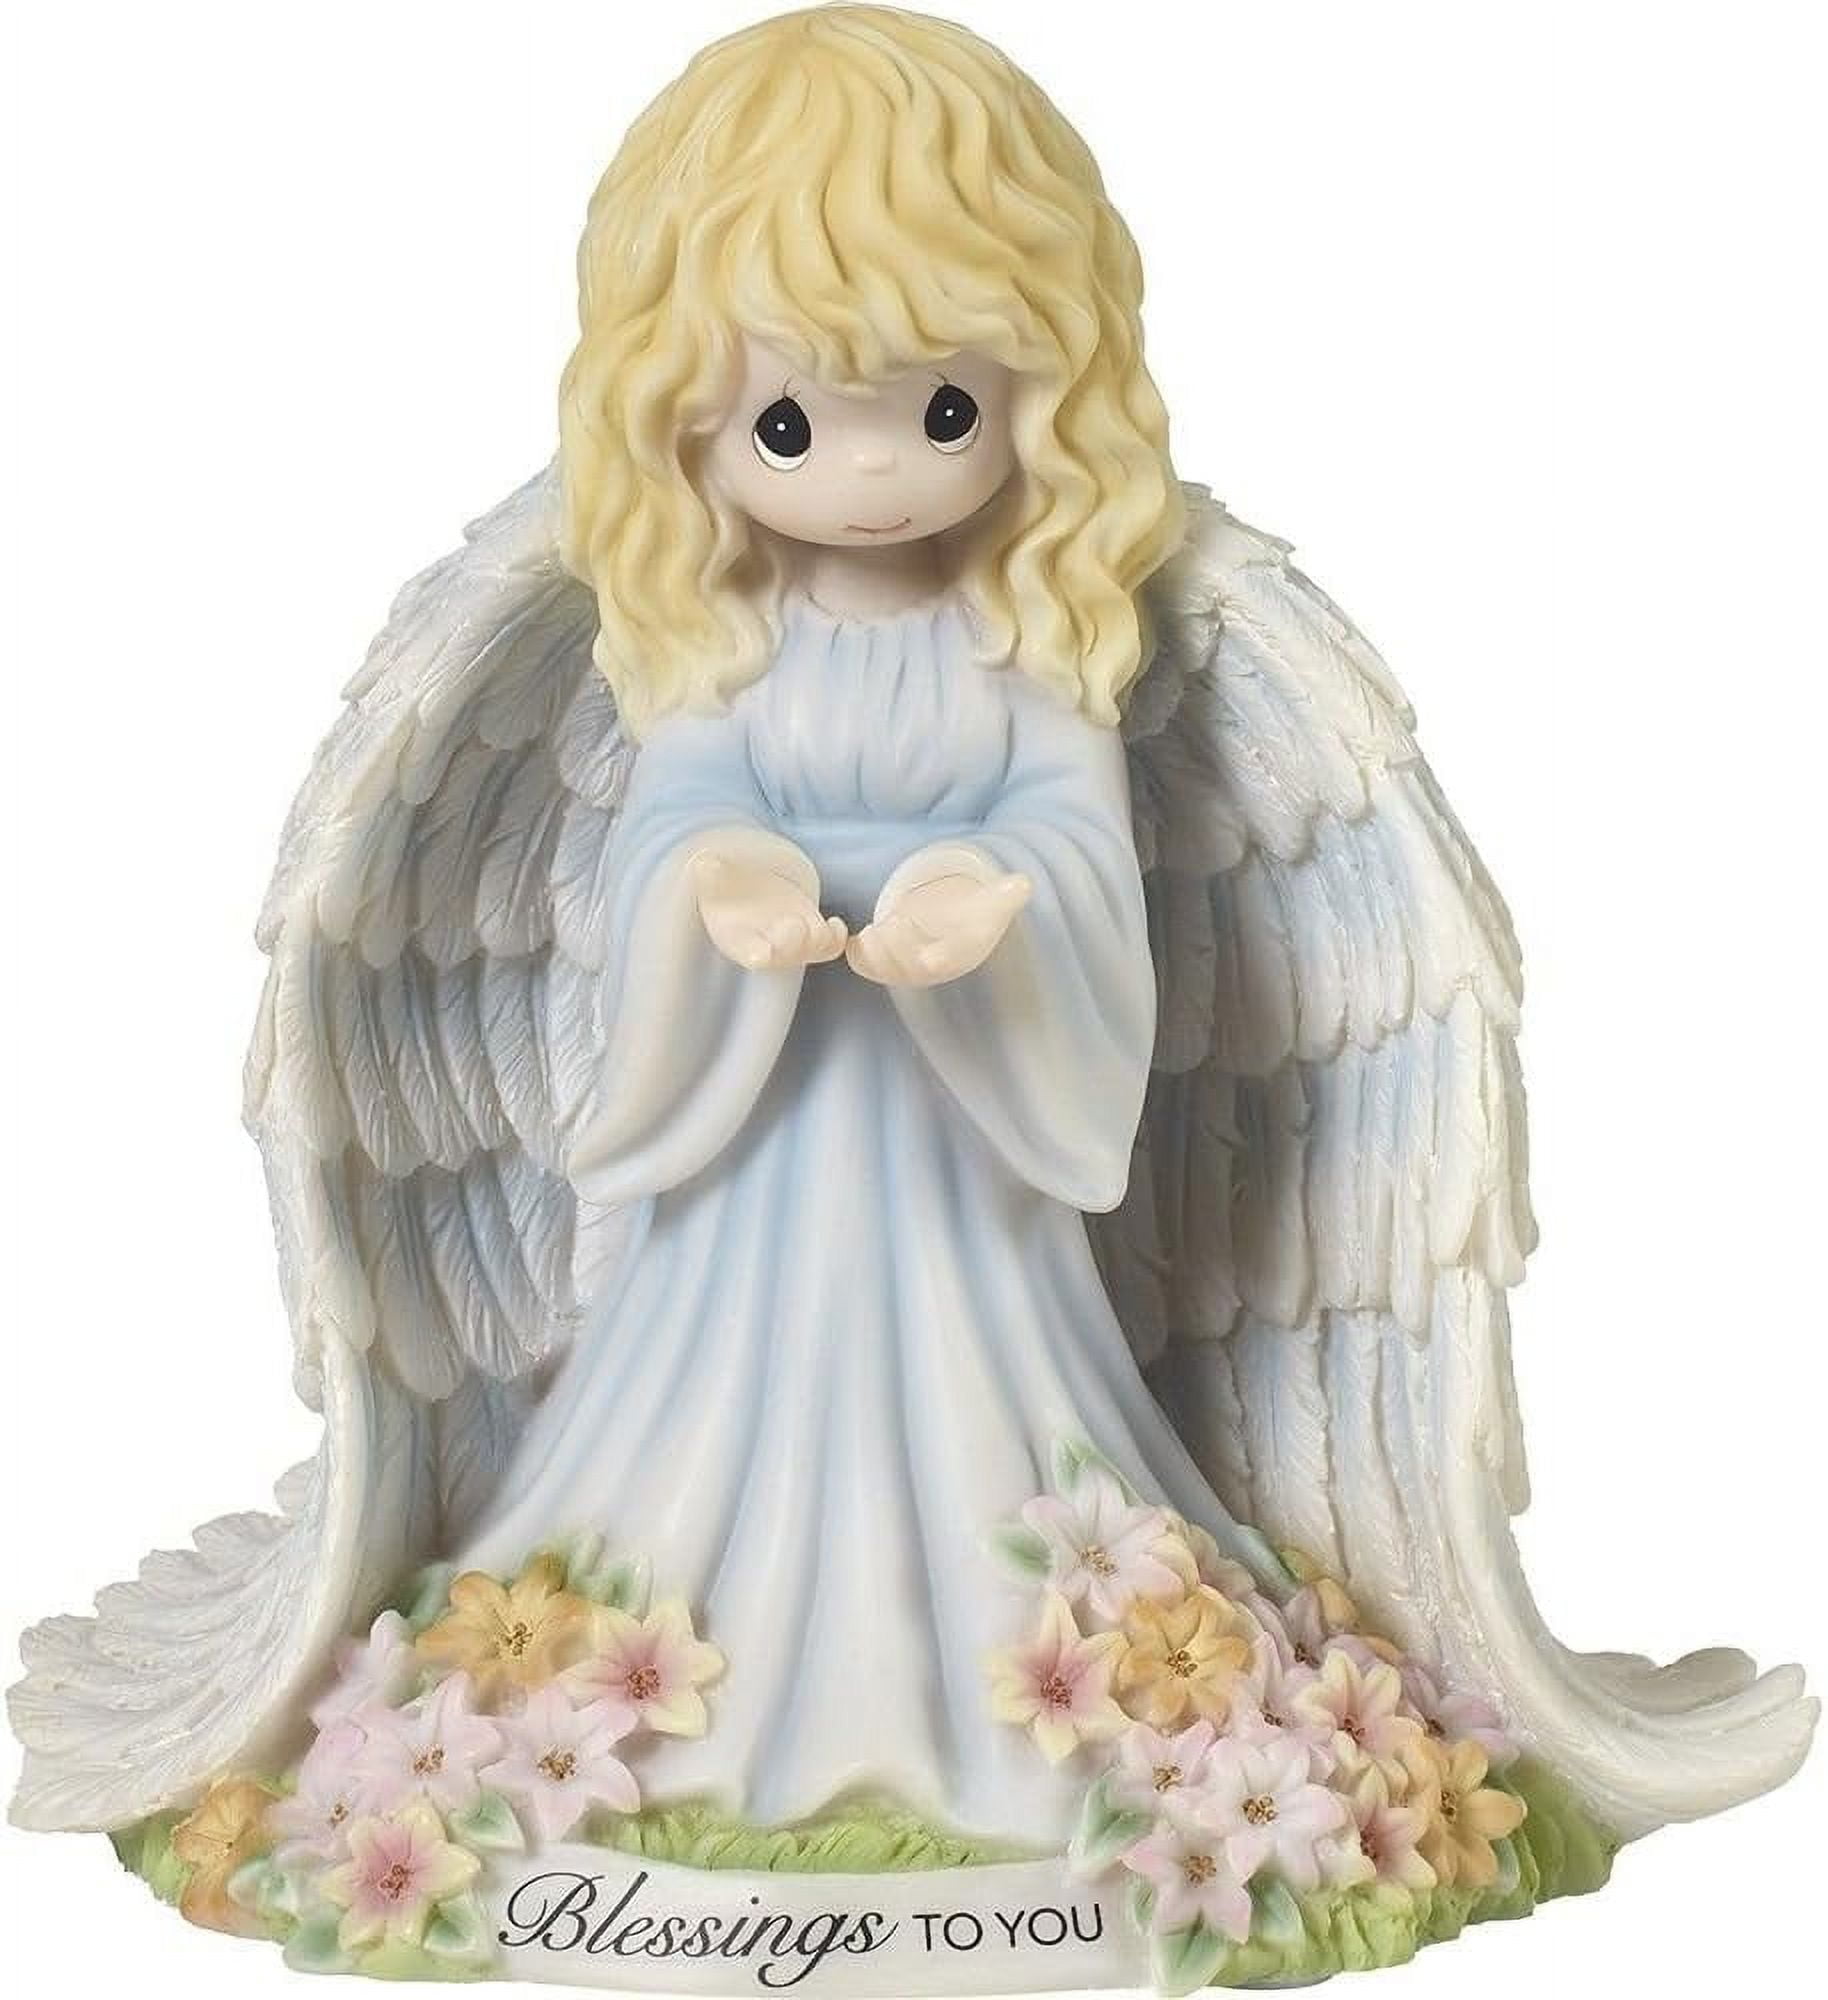 Precious Moments Blessings to You Inspirational Angel Resin Figurine 